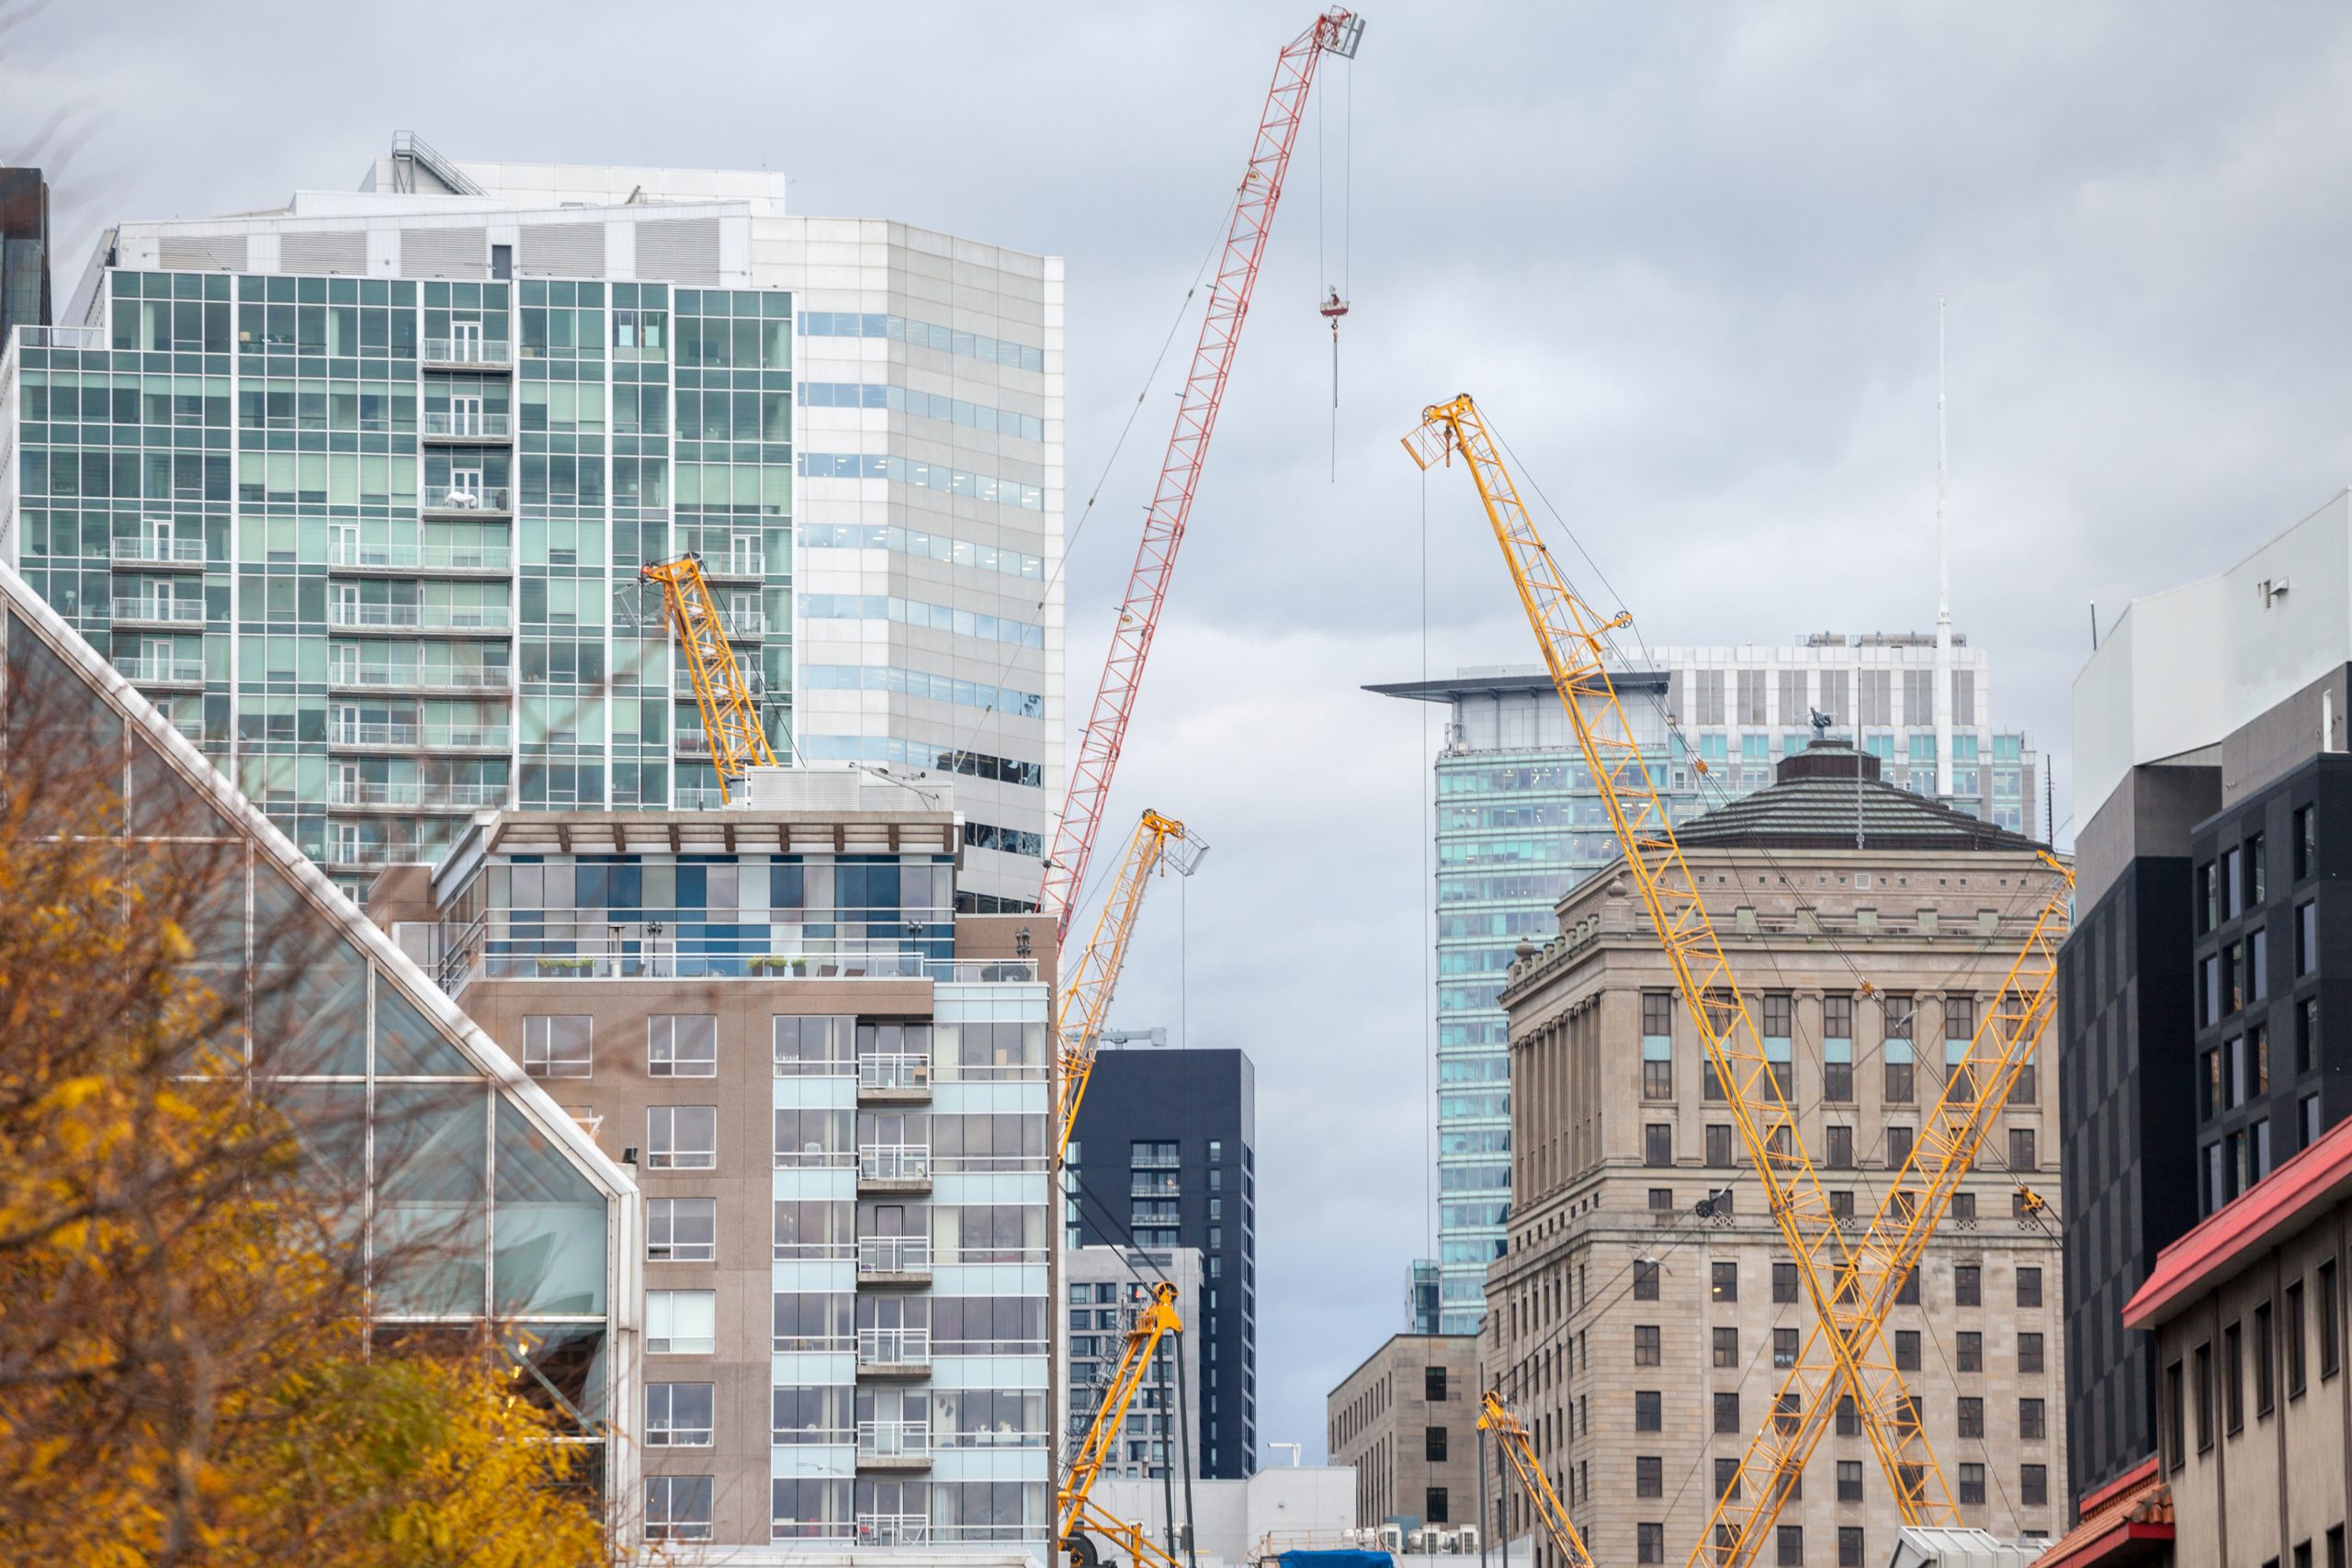 QUEBEC EYES CONSTRUCTION INDUSTRY SHAKEUP TO BOOST HOUSING, INFRASTRUCTURE PROJECTS